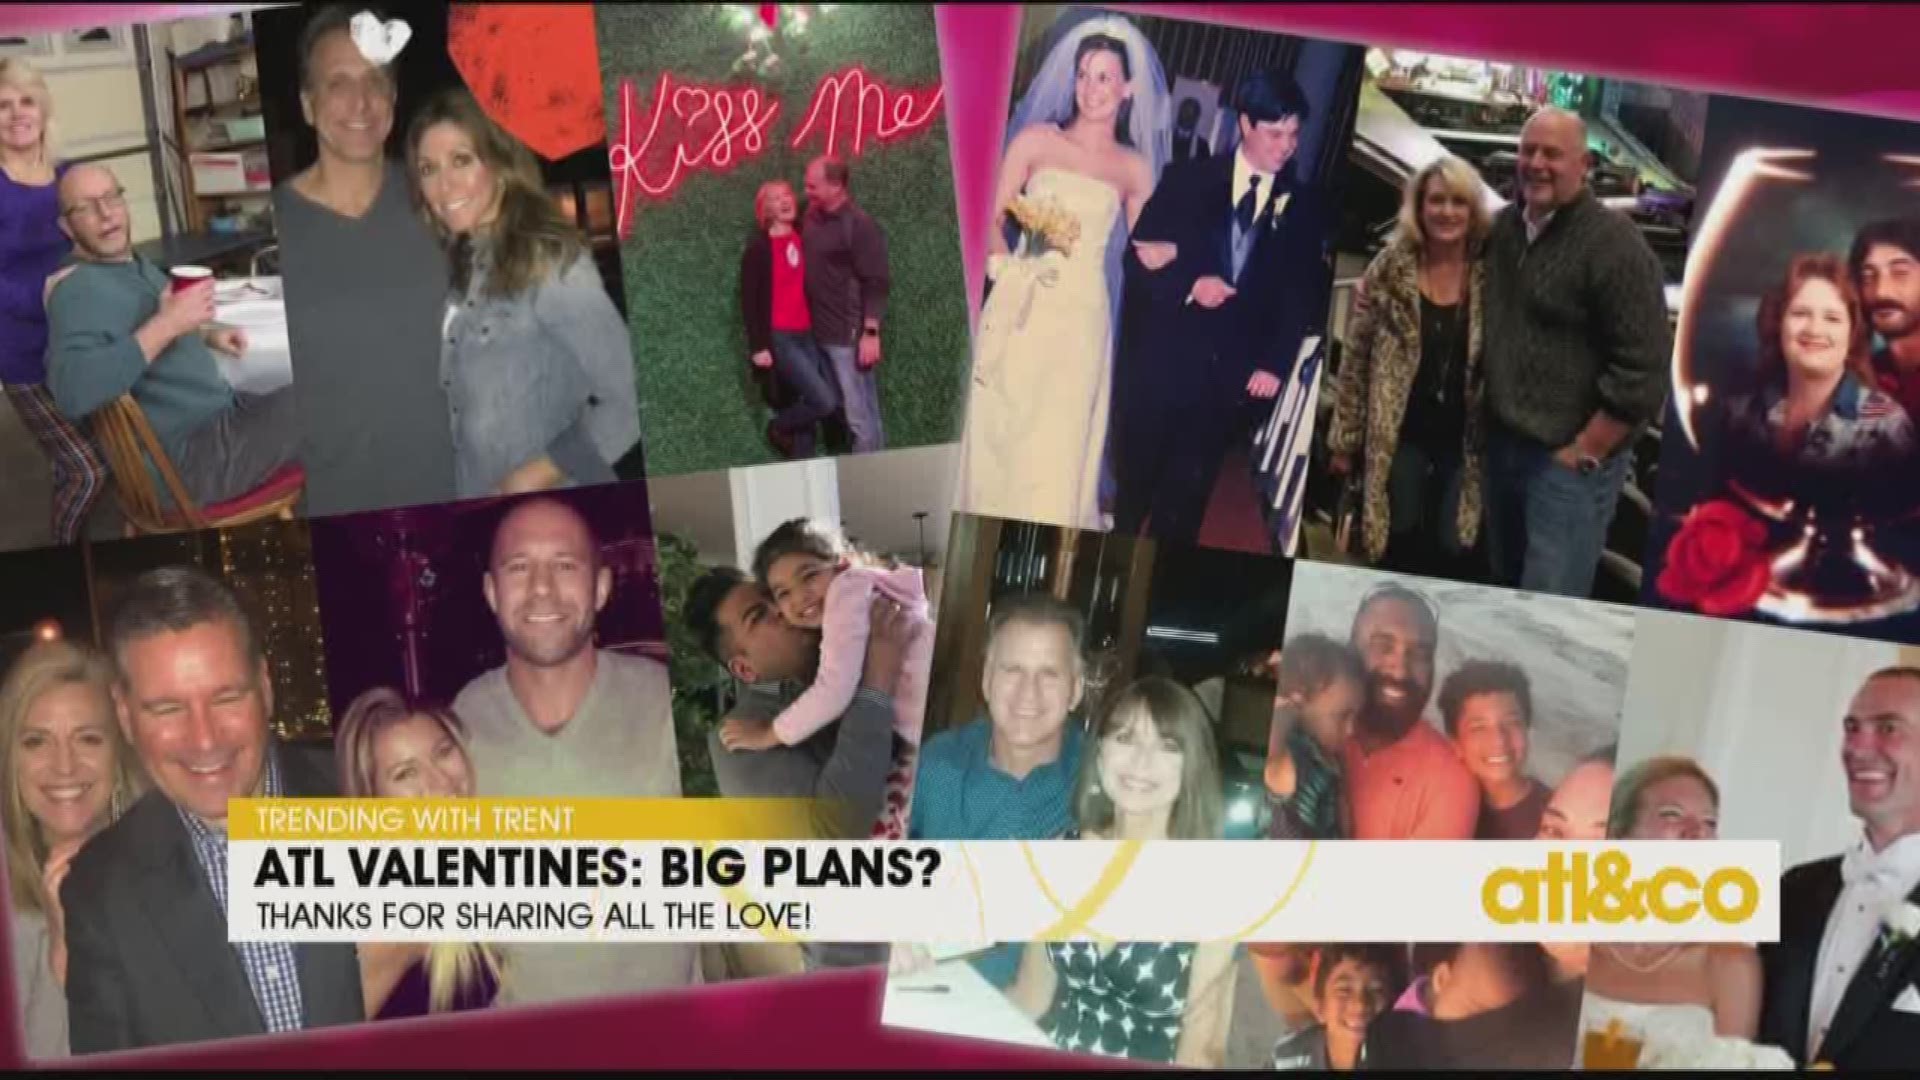 Trending with Trent hears from the people about their plans for Valentine's Day on 'Atlanta & Company'